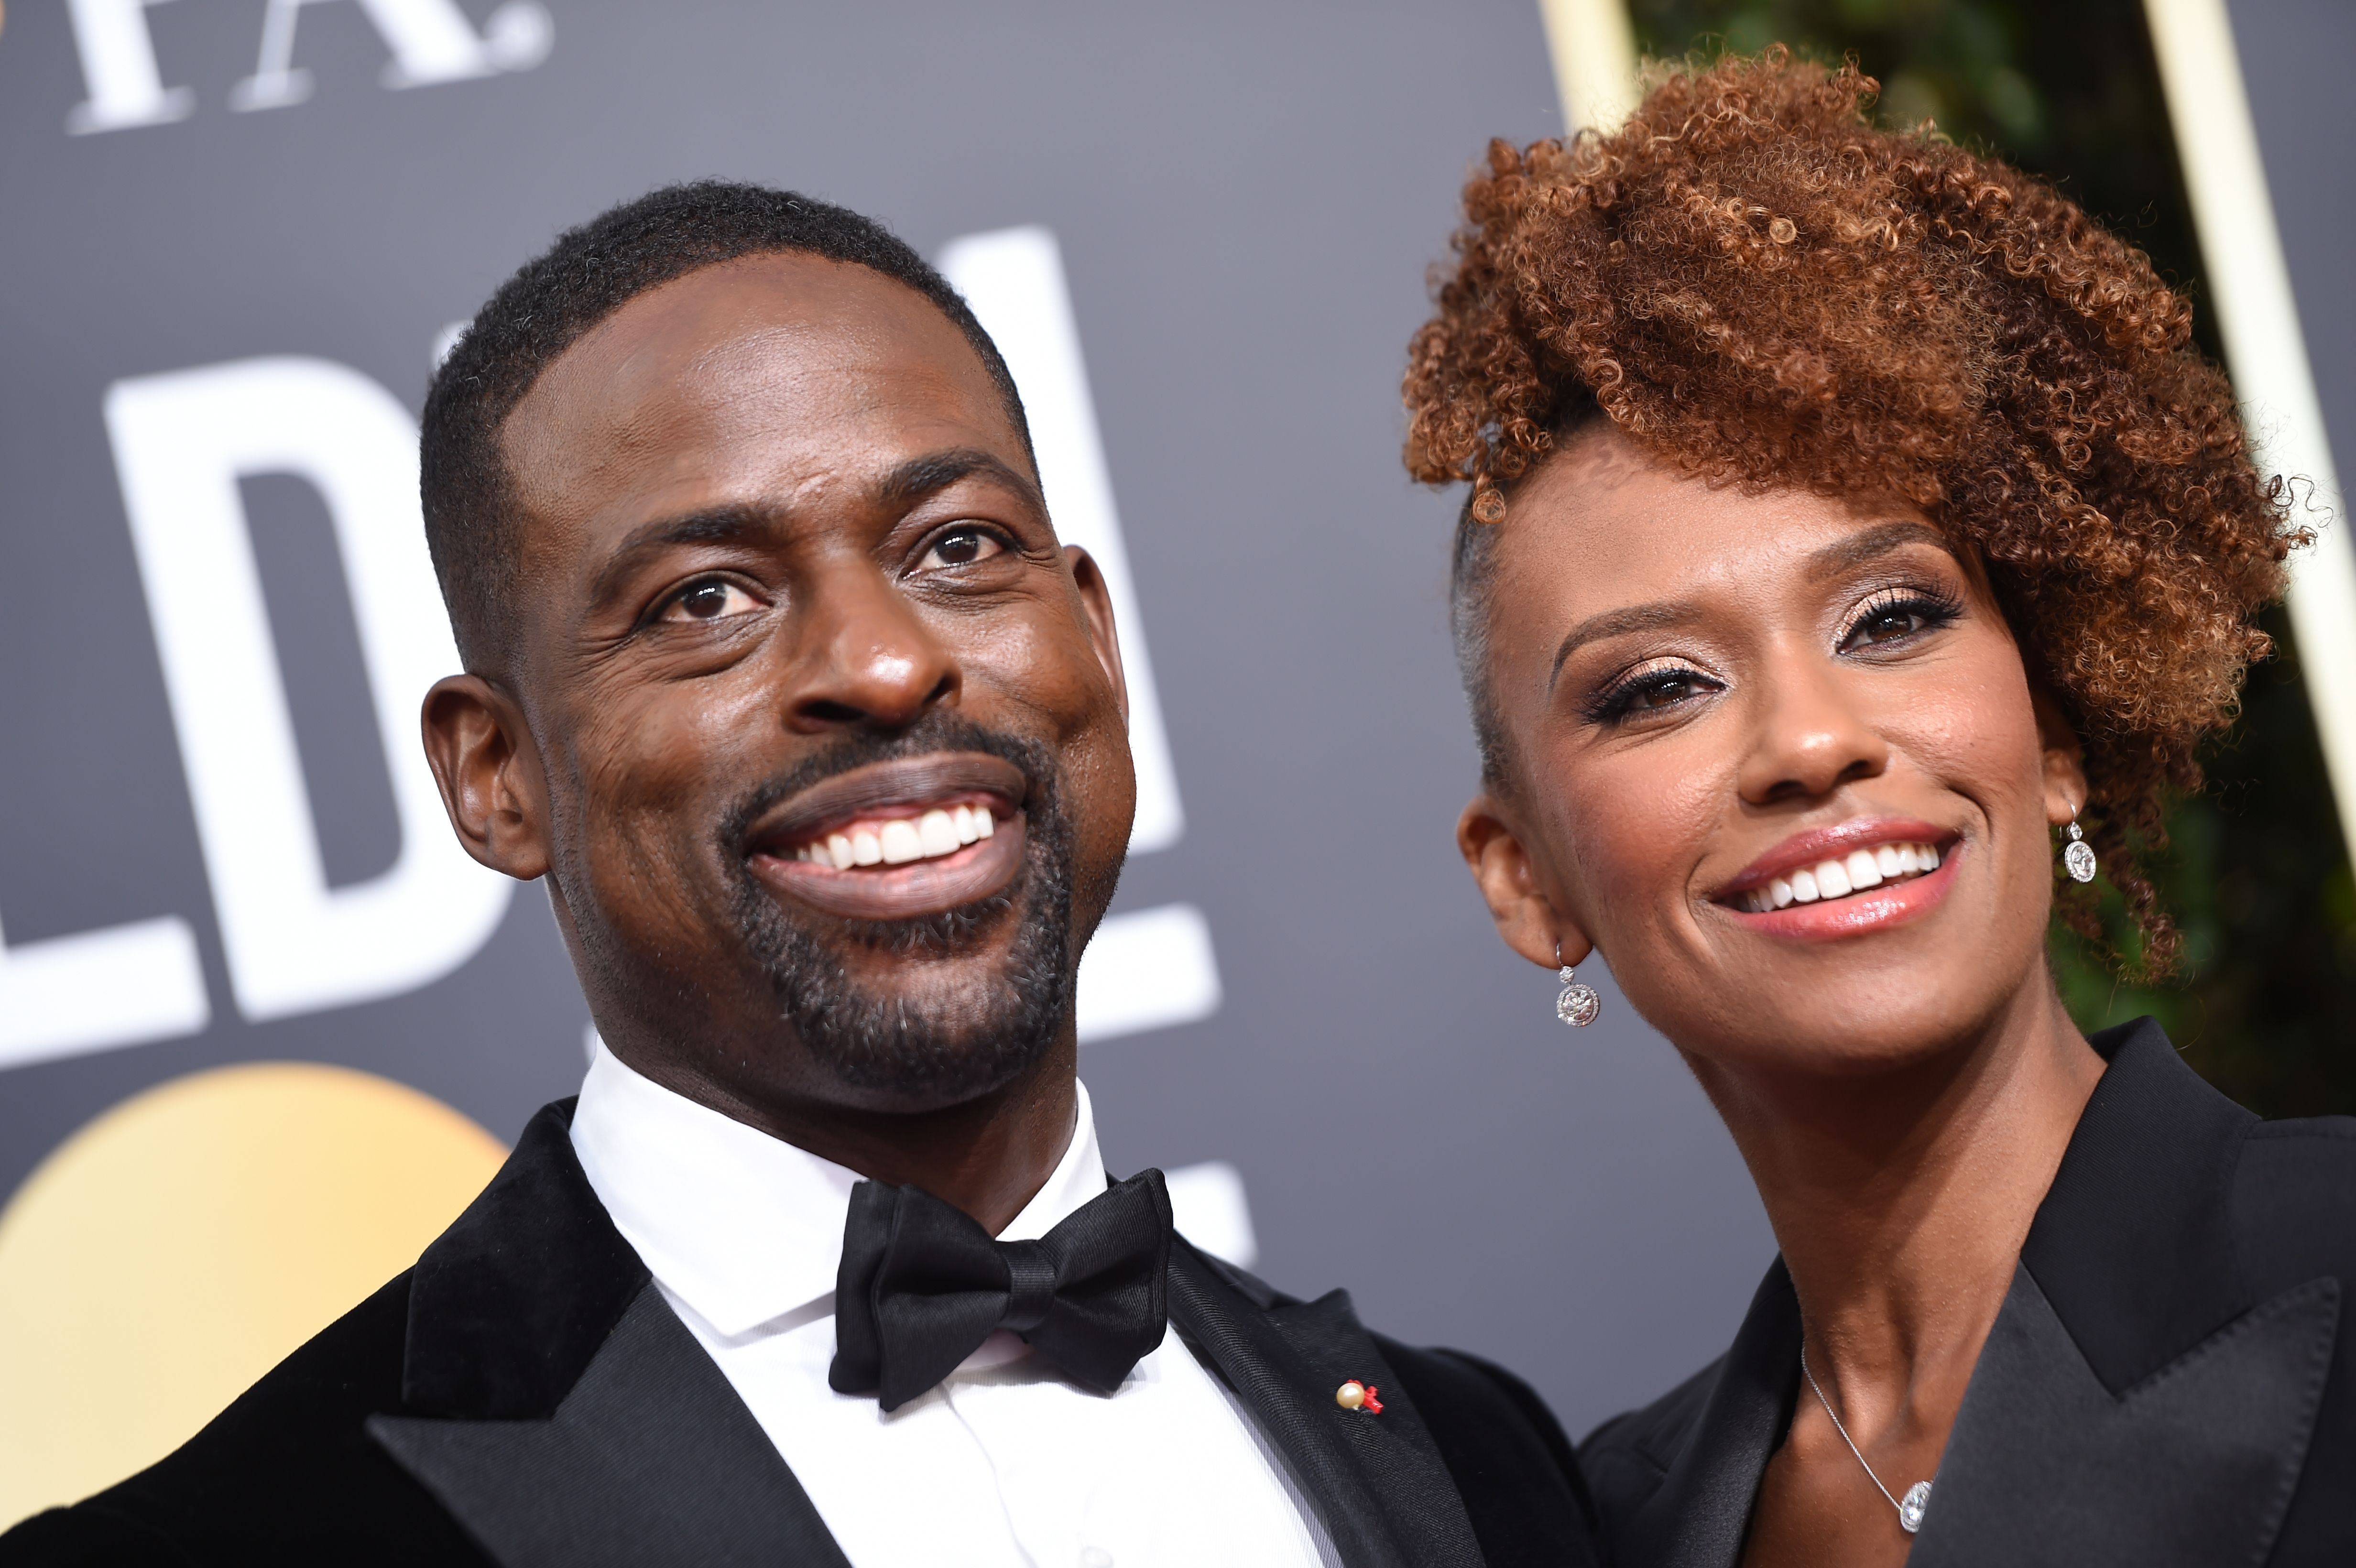 Who is sterling k brown's wife?